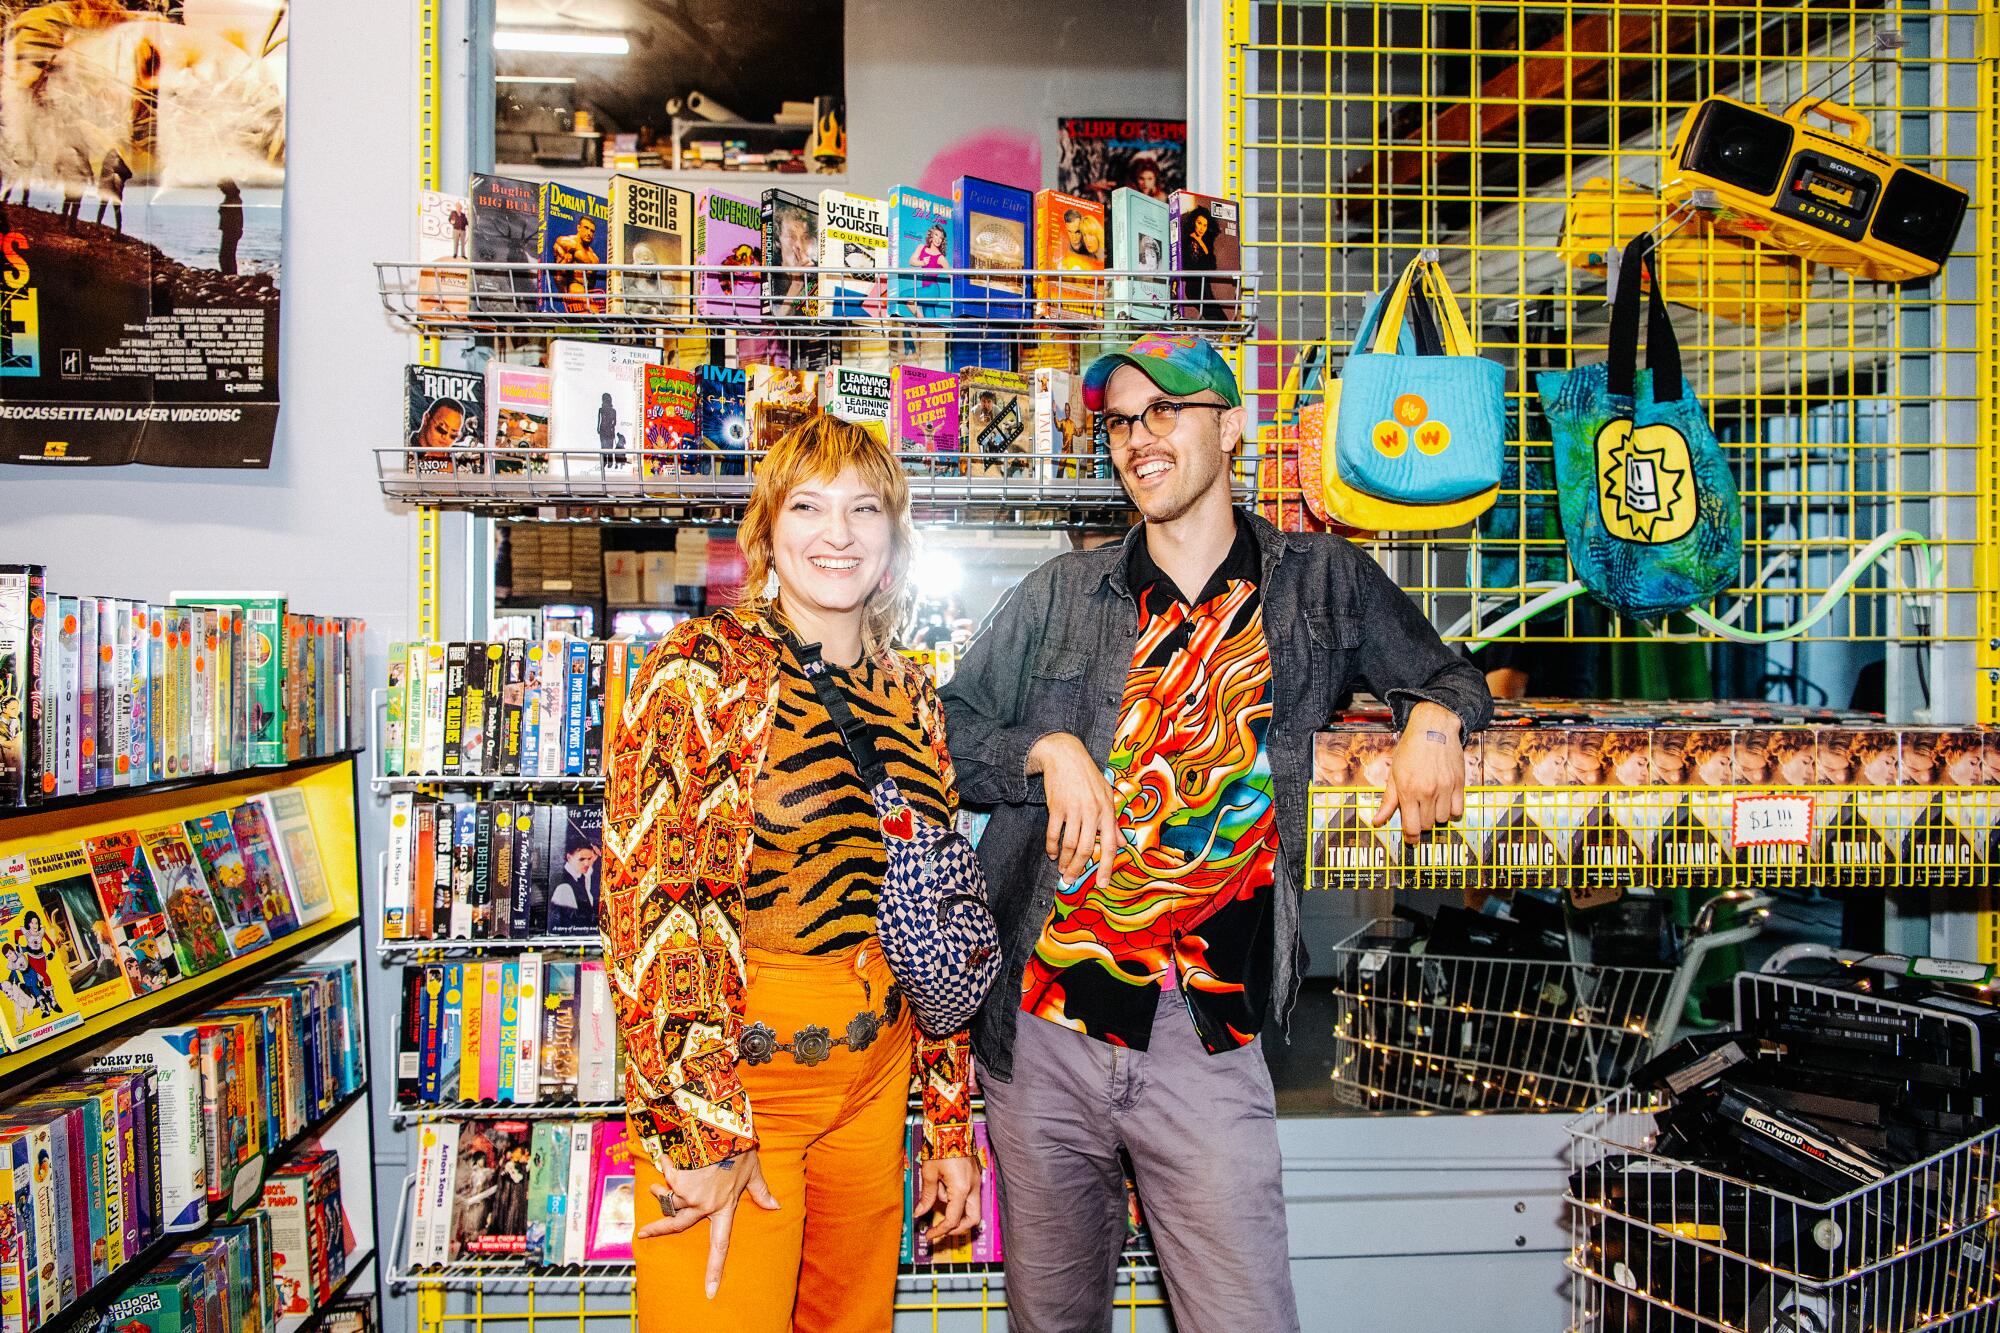 A woman, left, and a man in bright outfits smile among shelves of VHS tapes 